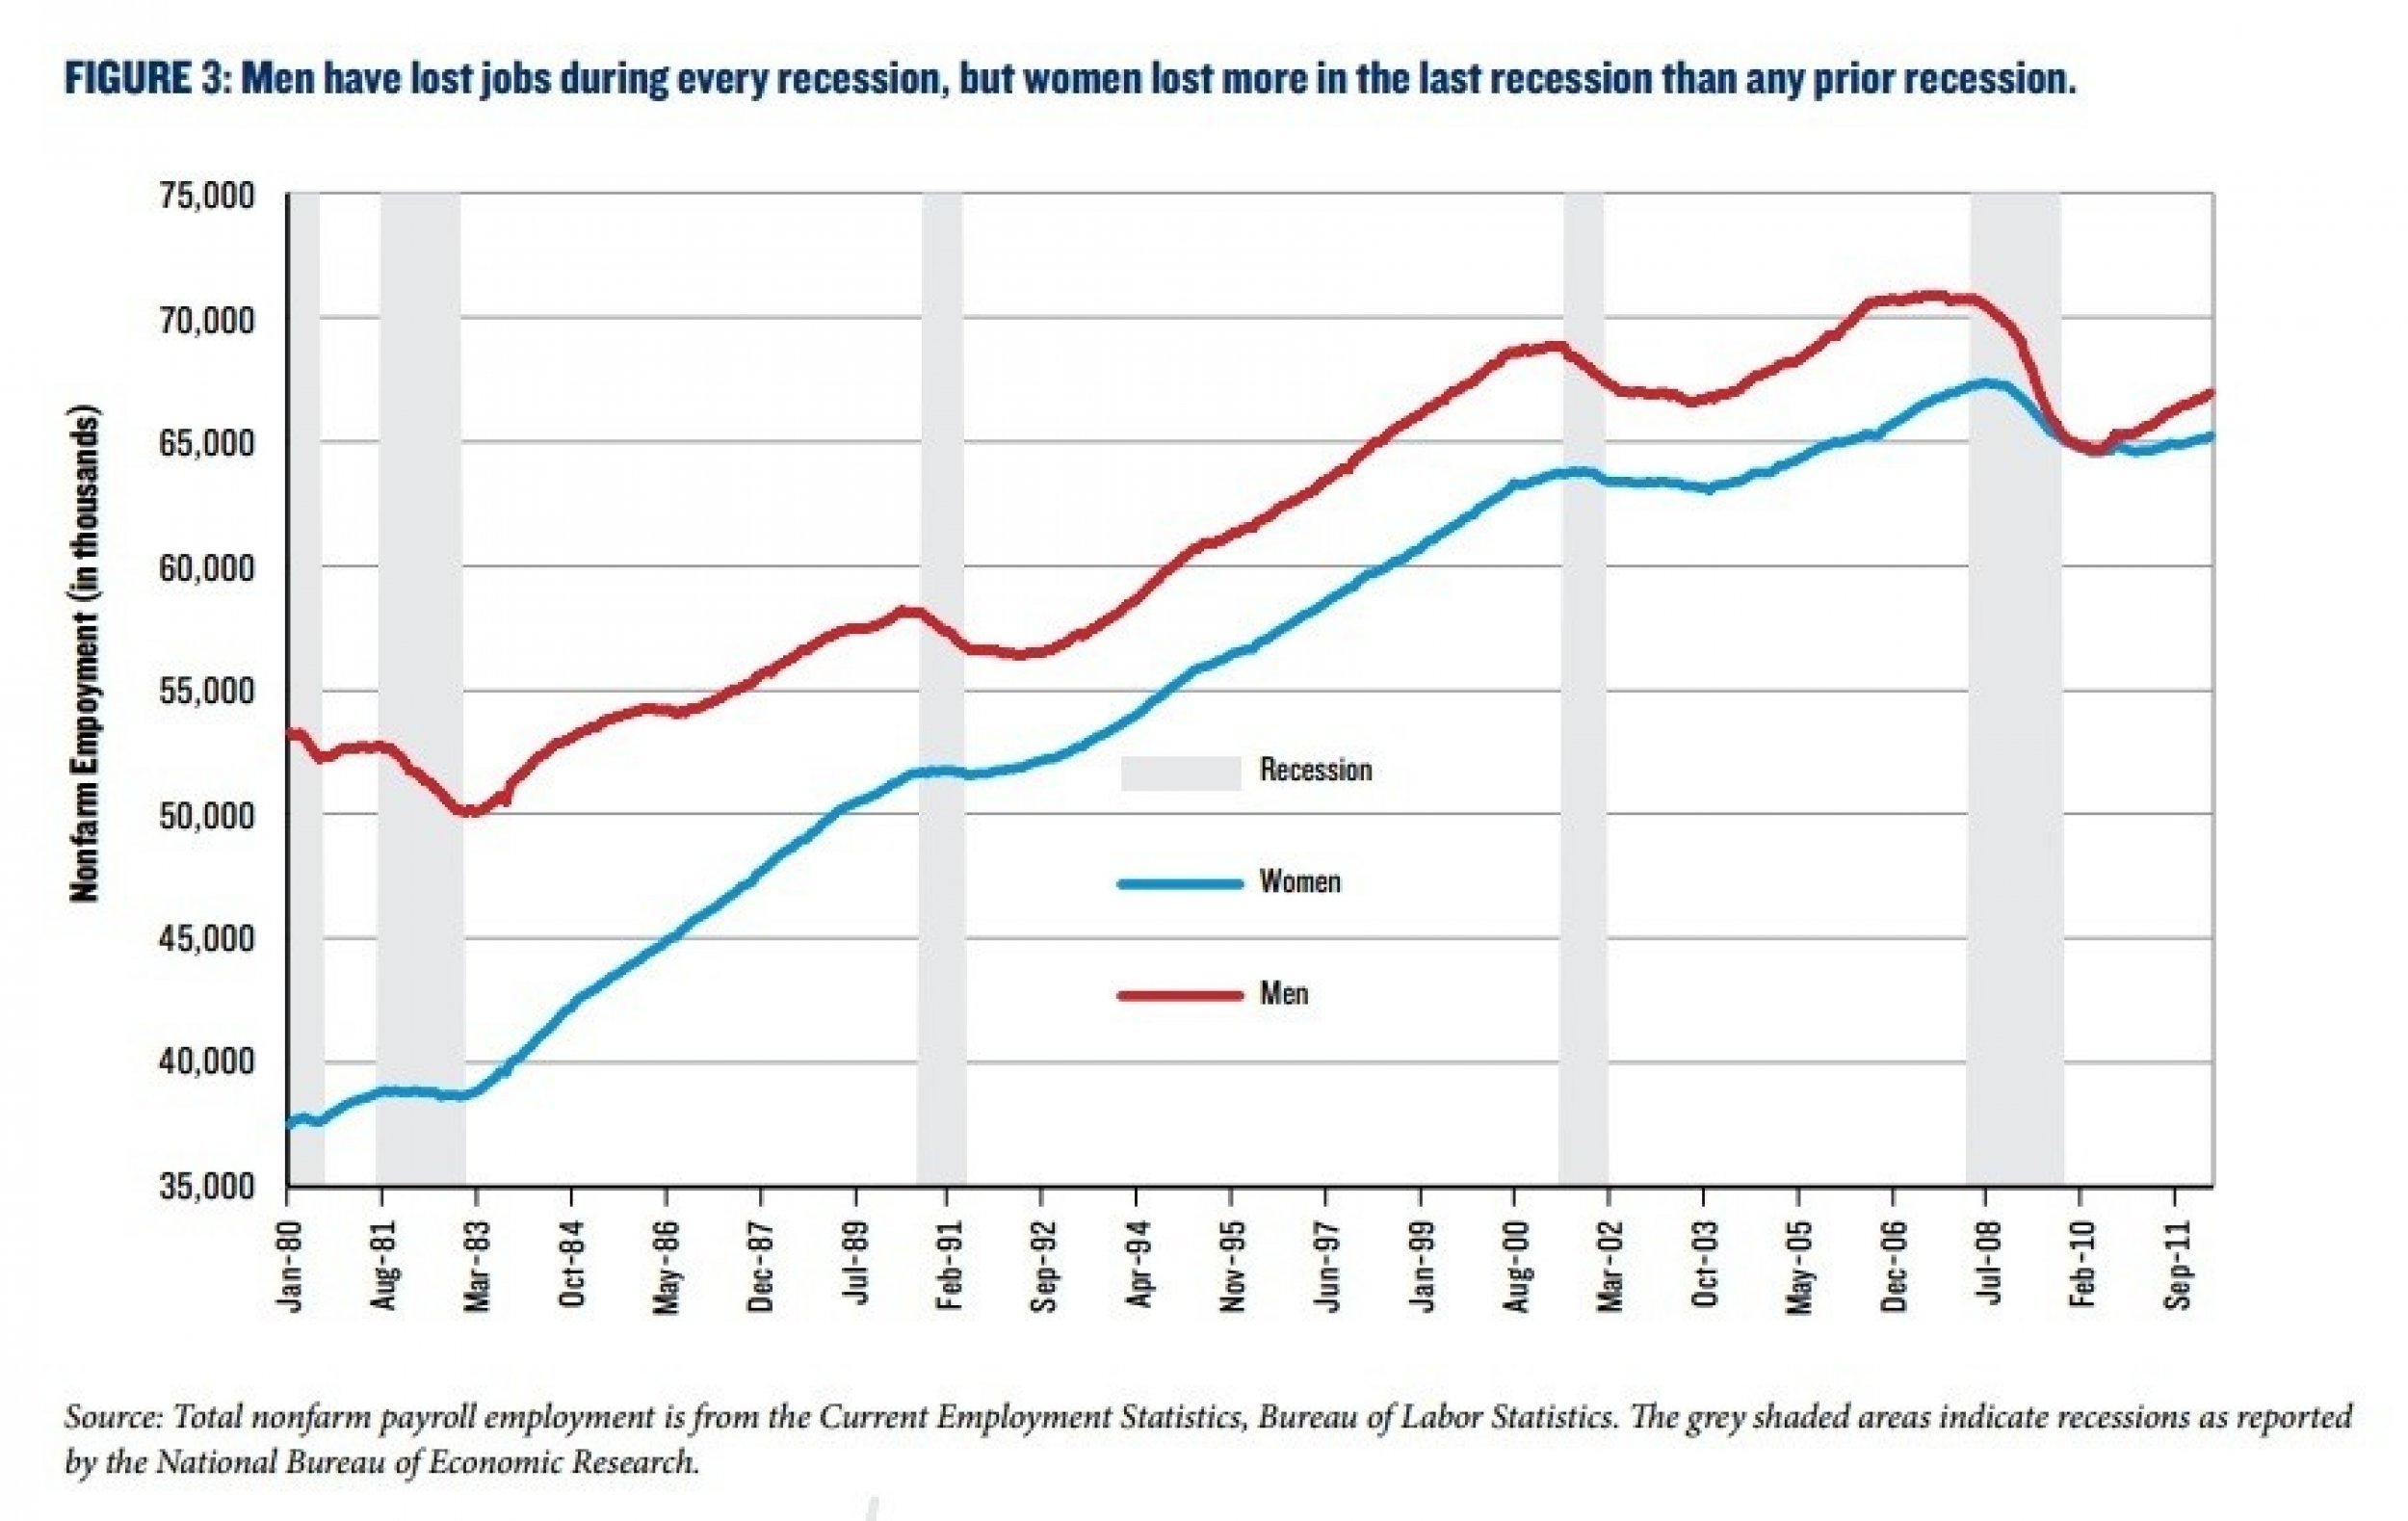 Men have lost jobs during every recession, but women lost more in the last recession than any prior recession